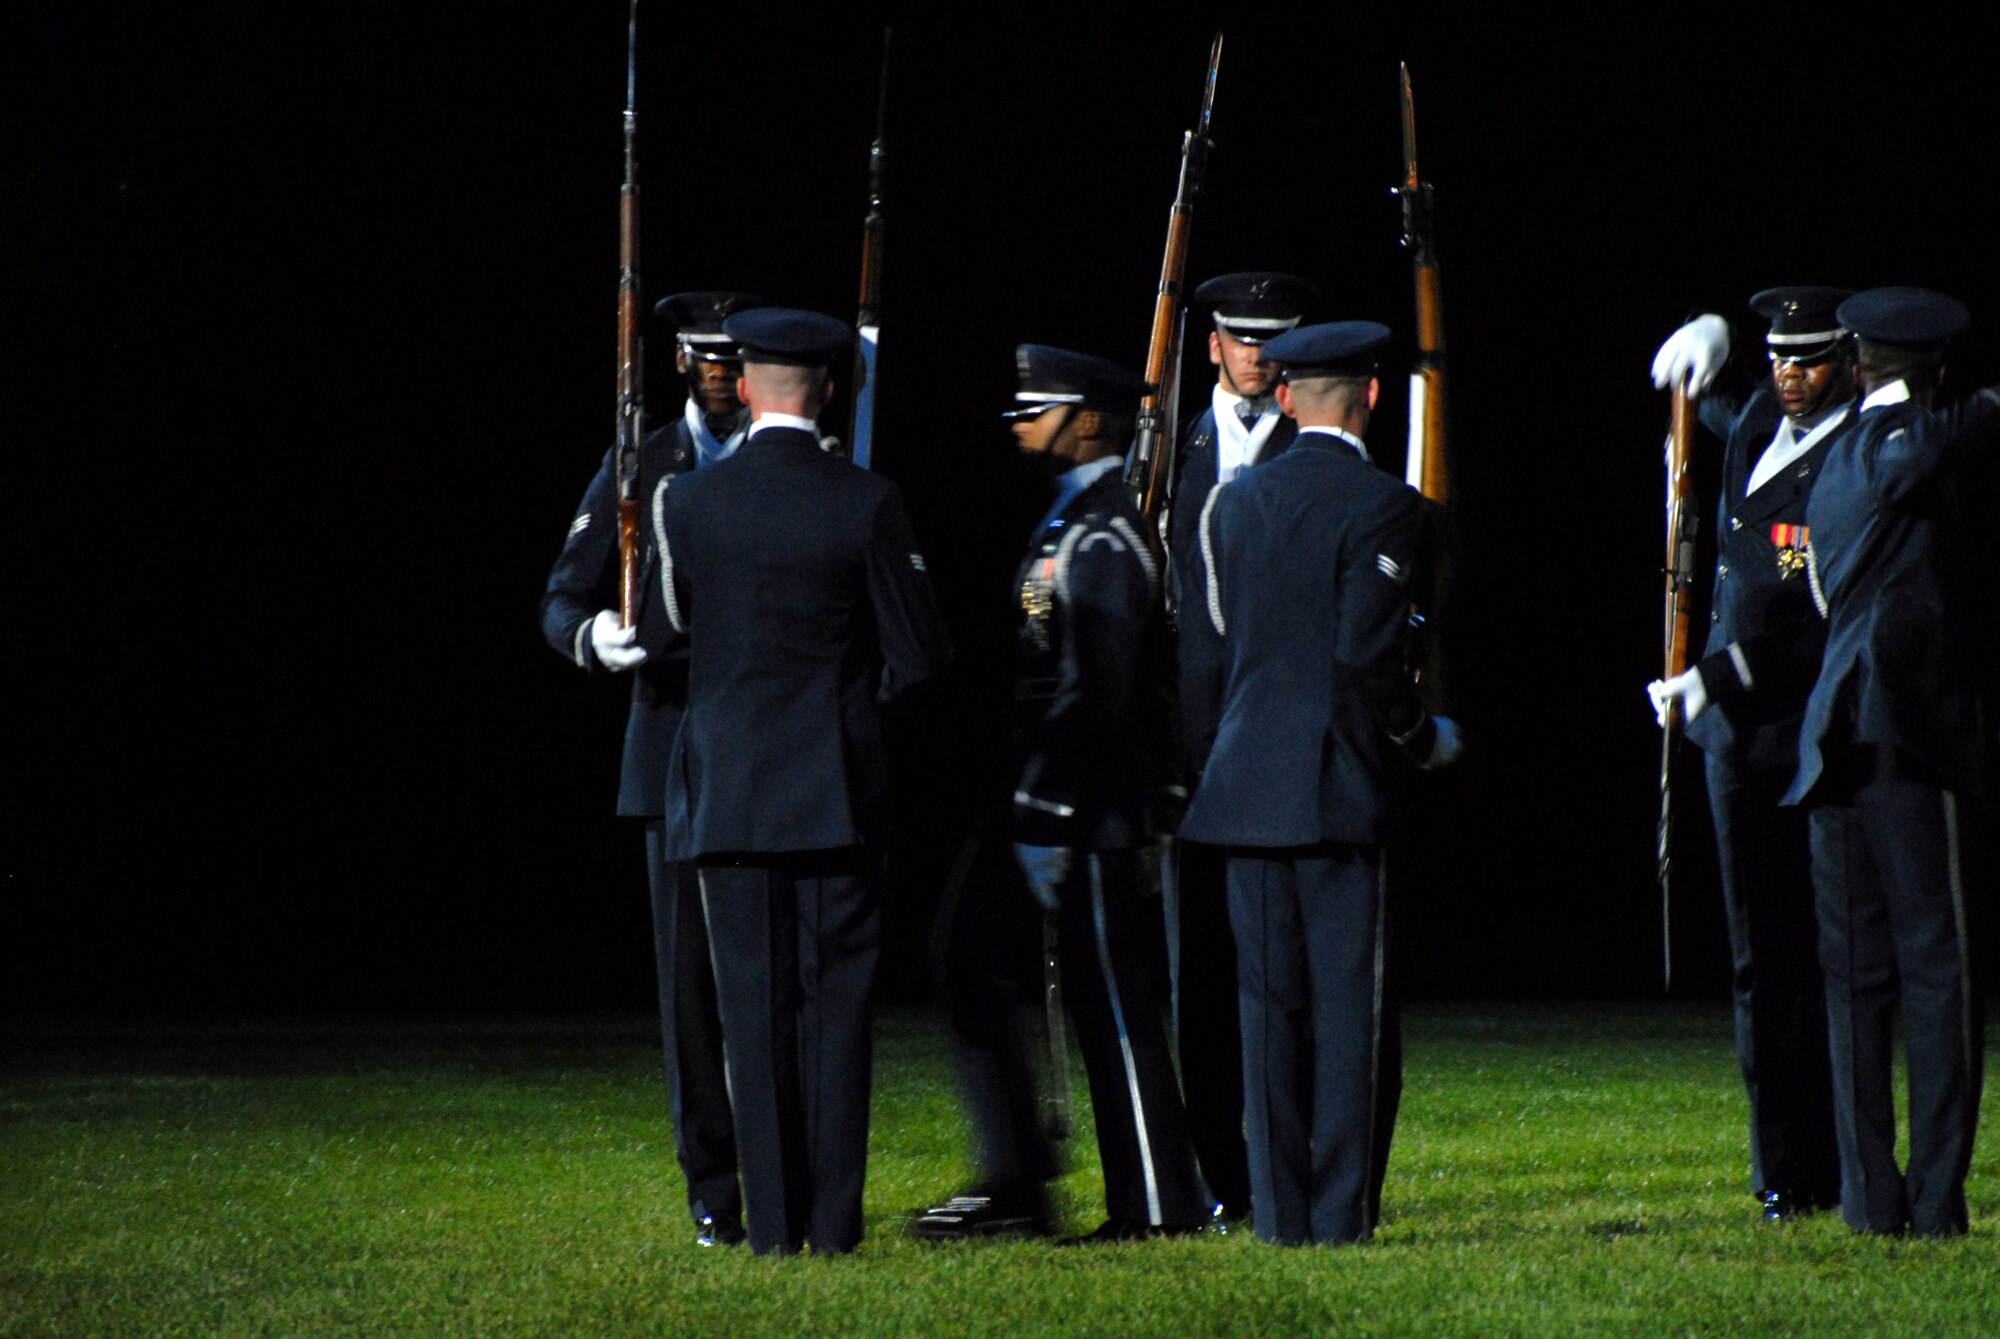 BOLLING AFB, D.C. -- Capt. Joshua Hawkins, Air Force Honor Guard Drill Team commander, walks through a "gauntlet" of spinning rifles during the team's performance at the 60th Anniversary Air Force Tattoo dress rehearsal Sept. 22.
The military tattoo, which is held annually at Bolling, highlights troop excellence and readiness.  The tattoo dates back to the mid-17th century British Army deployment to the Netherlands in which drummers were sent from the garrison to the towns at 9:30 each night to let soldiers know it was time to return to the fort.
(U.S. Air Force photo by Staff Sgt. Madelyn Waychoff)